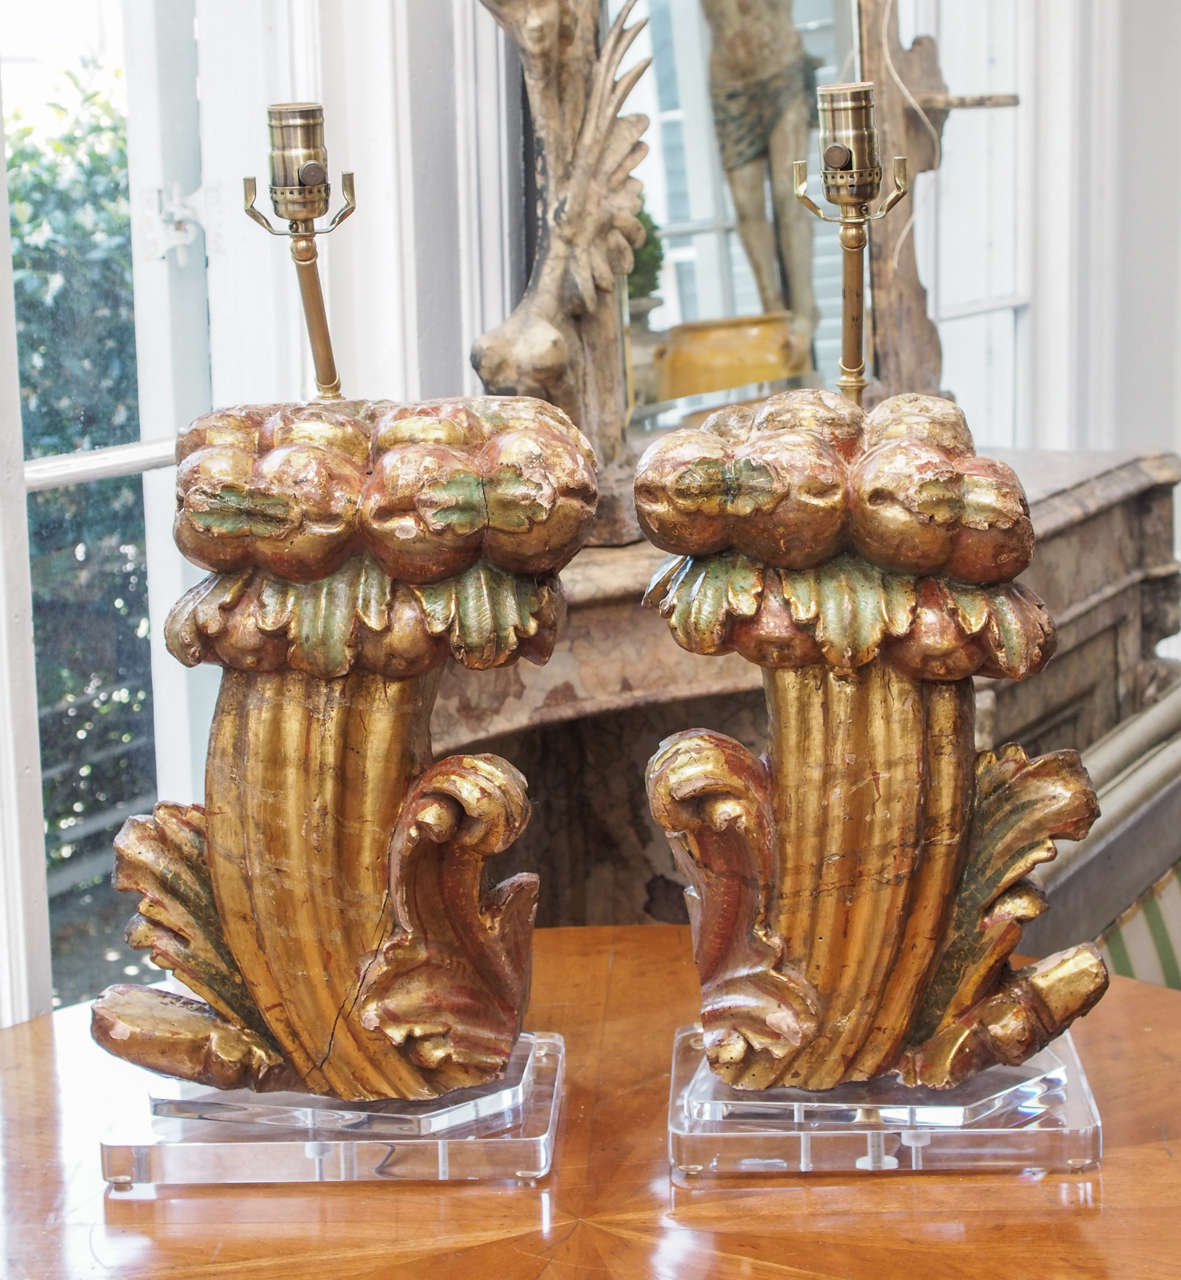 19th century fragments   Painted and gilded on lucite bases